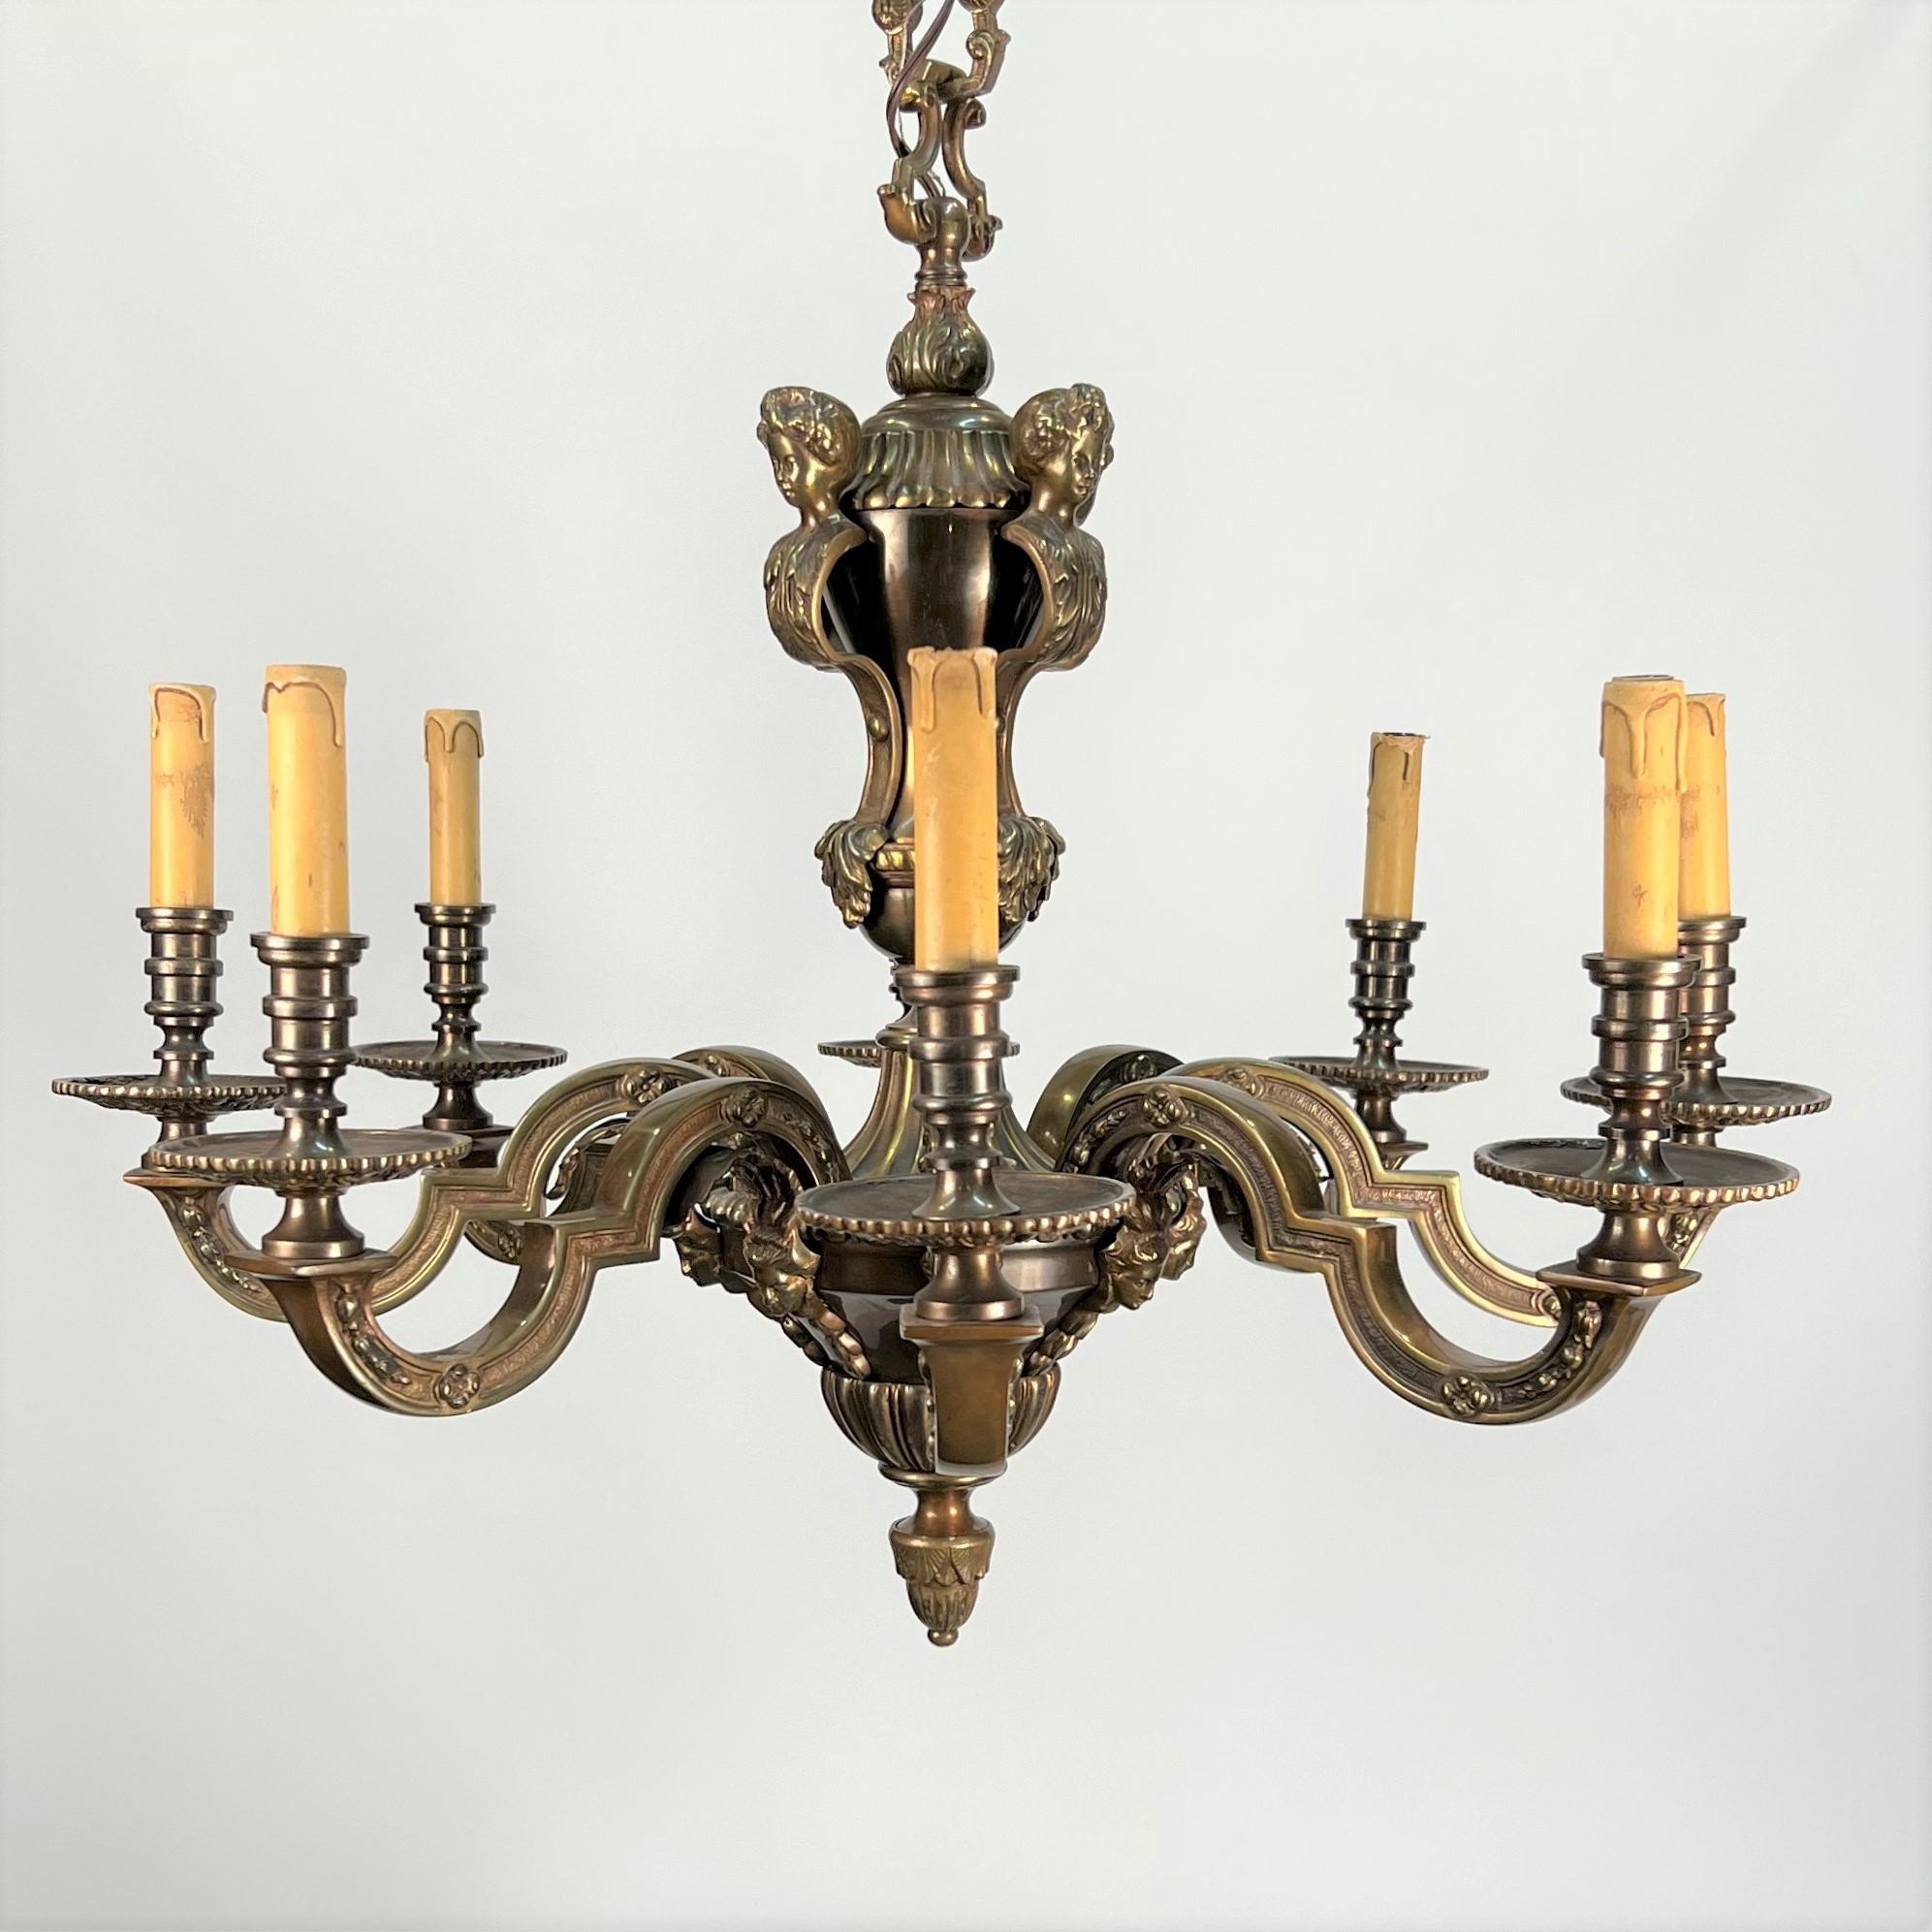 This early 20th century French bronze chandelier features female heads liking to the caryatides of the Acropolis. Each of the four heads at the top of the chandelier preside over eight beautifully hand cast and chased arms featuring bell flowers and